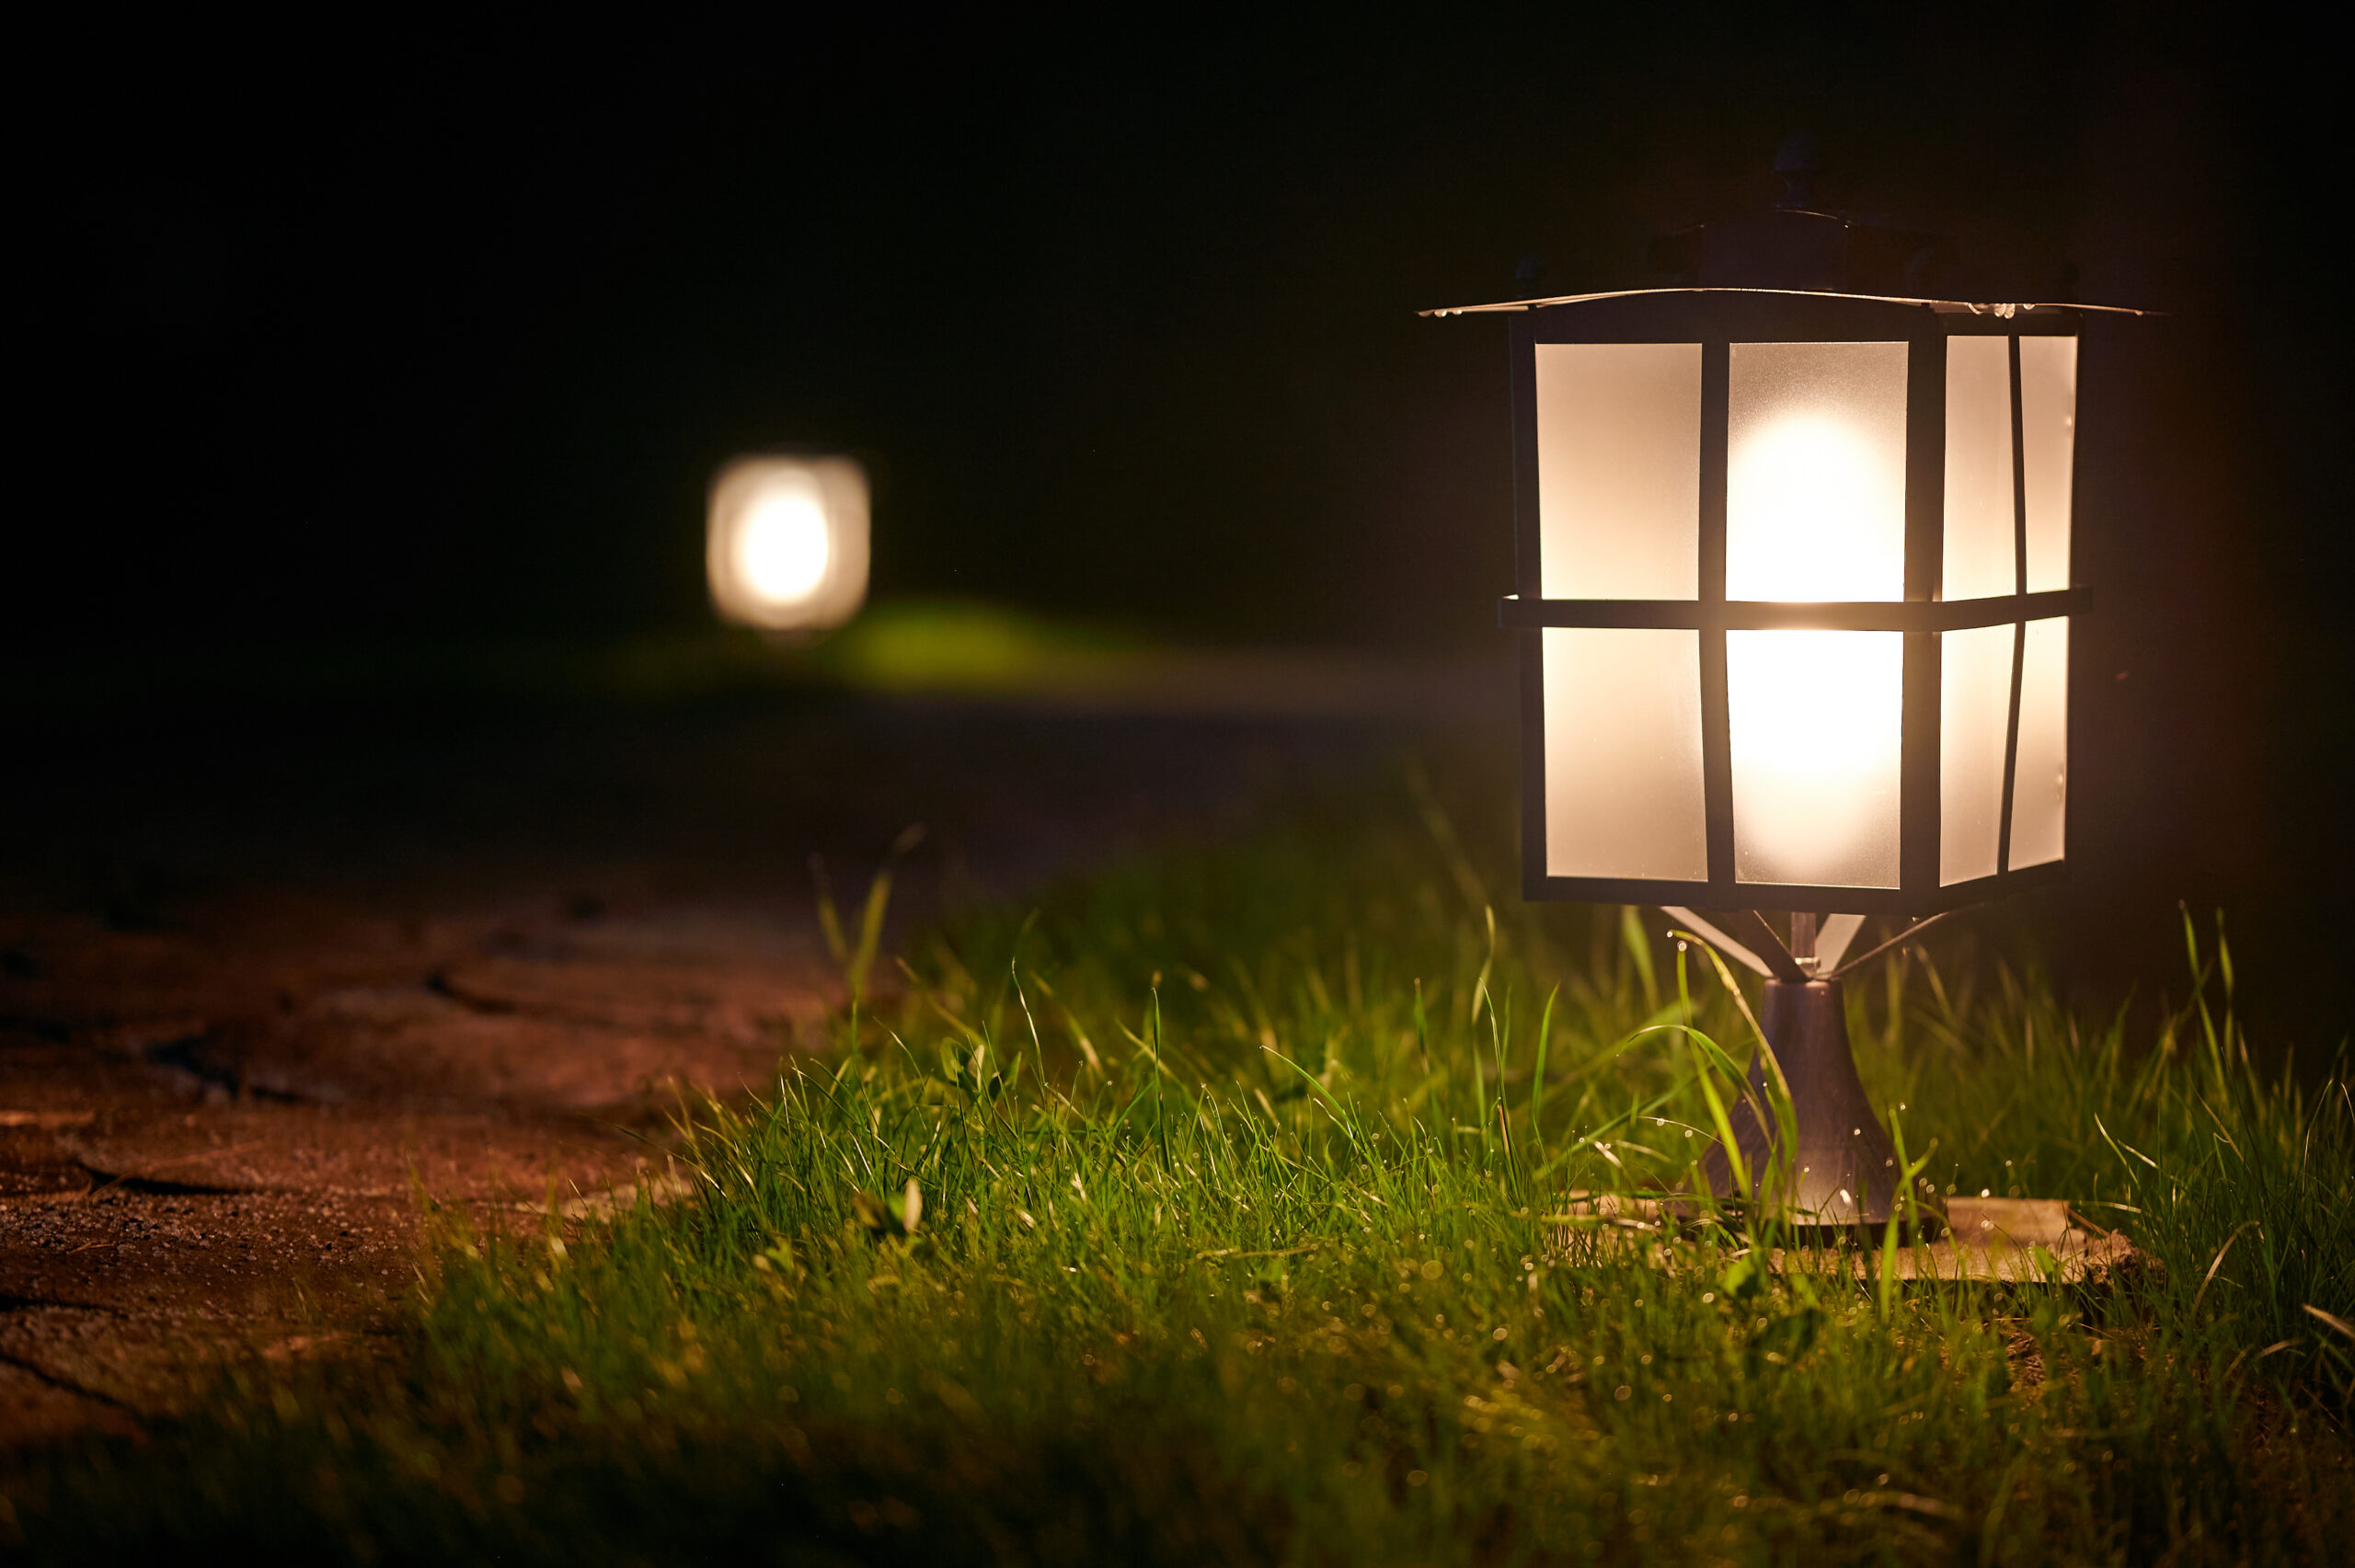 Should you install solar landscape lighting in West Grove, PA